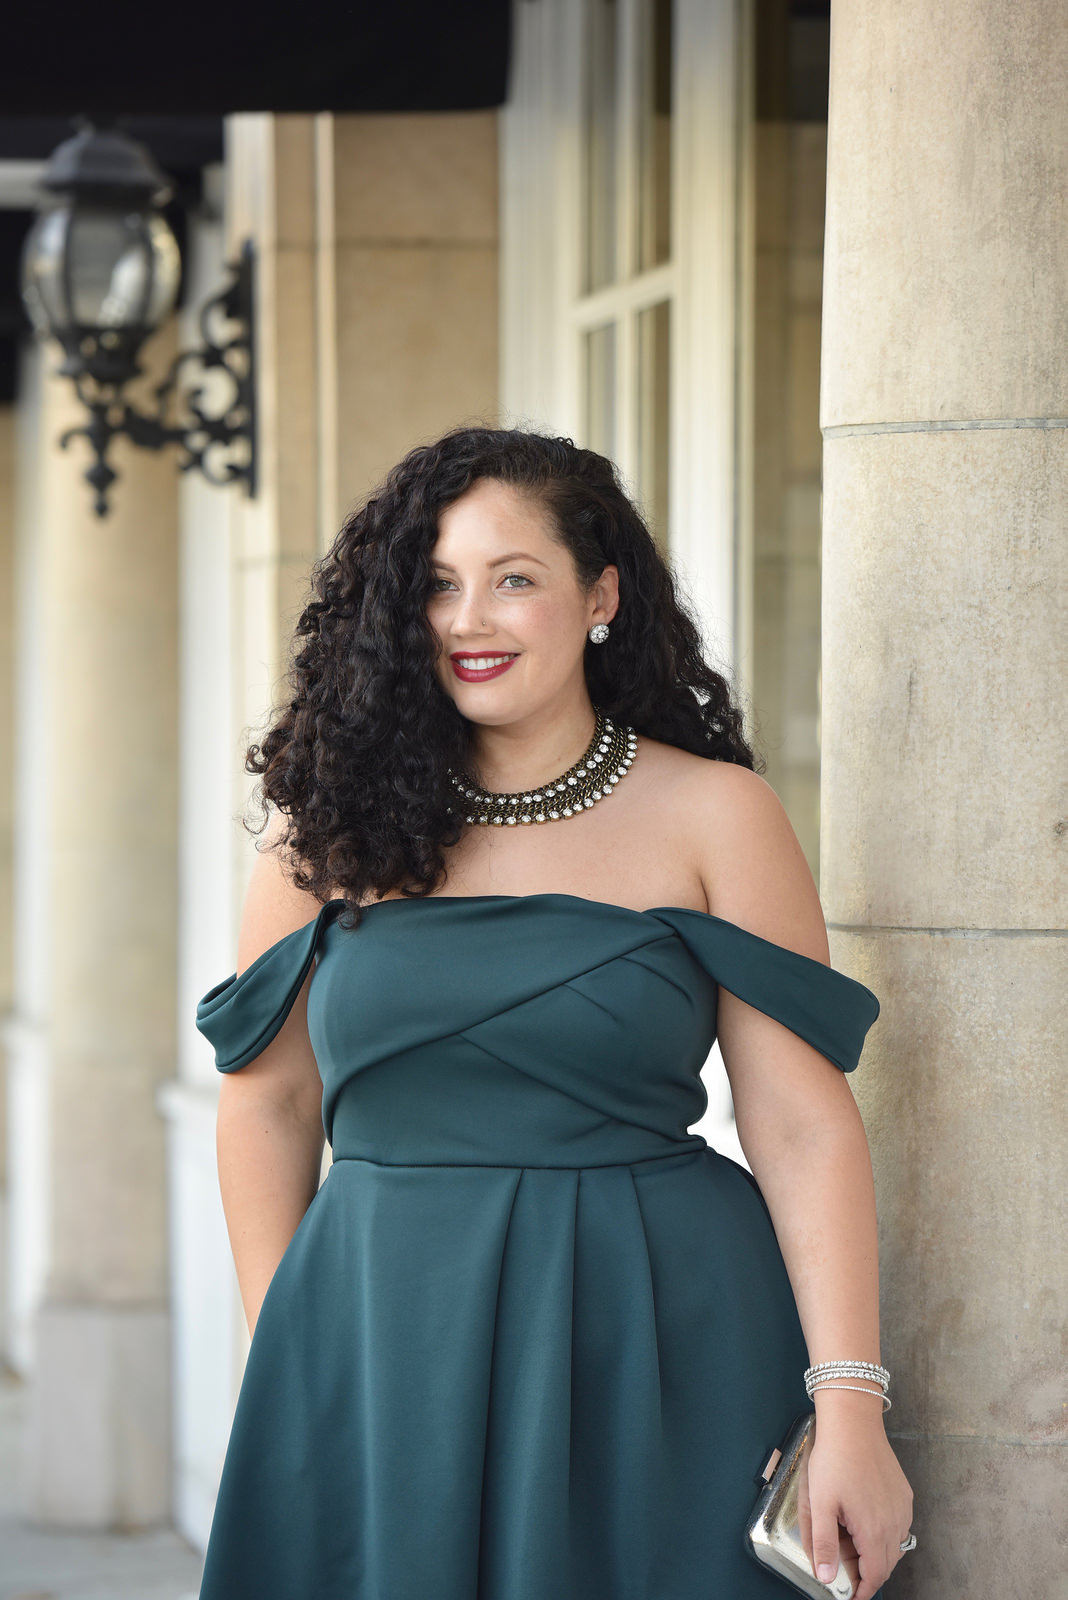 Girl With Curves blogger Tanesha Awasthi wears an emerald off-shoulder dress and statement necklace in downtown San Jose, CA.